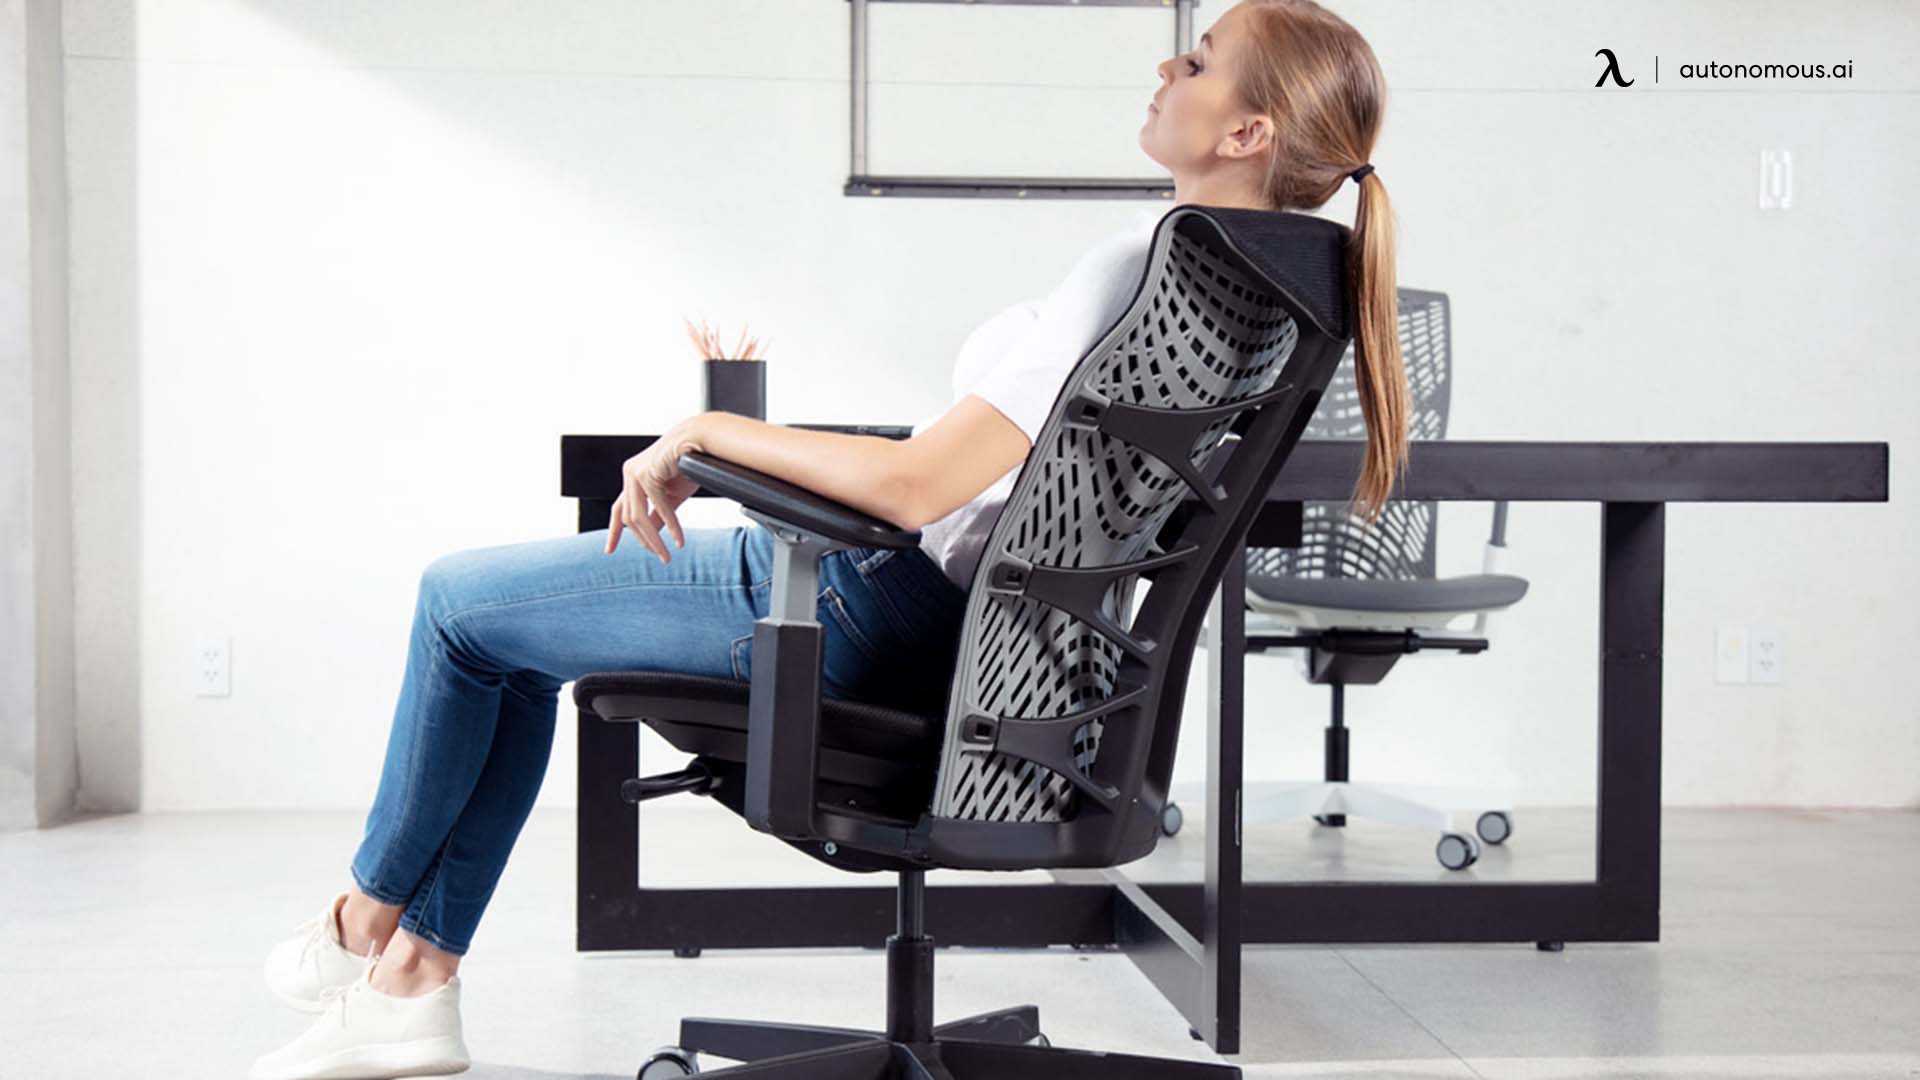 Quick Tips for Getting the Most out of Your Lumbar Support